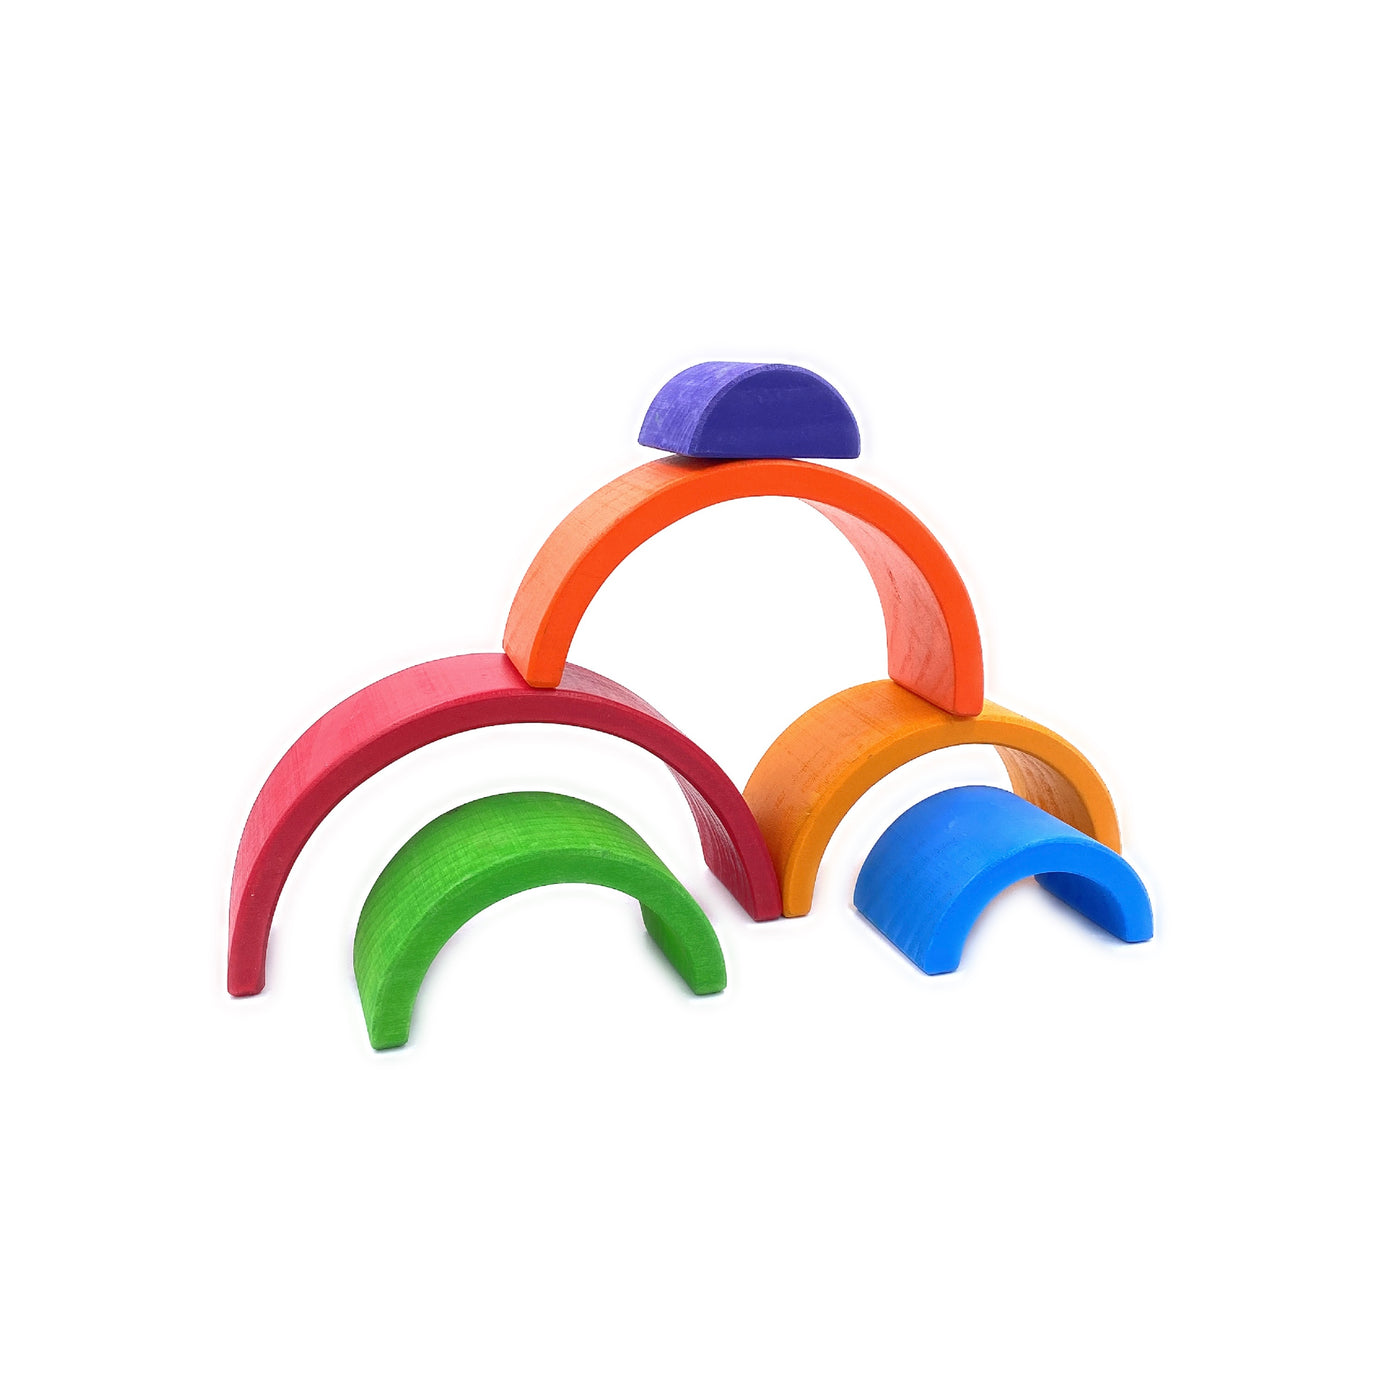 6 Pcs Small Rainbow Stacking Blocks in Primary Colors – Green Elephant ...